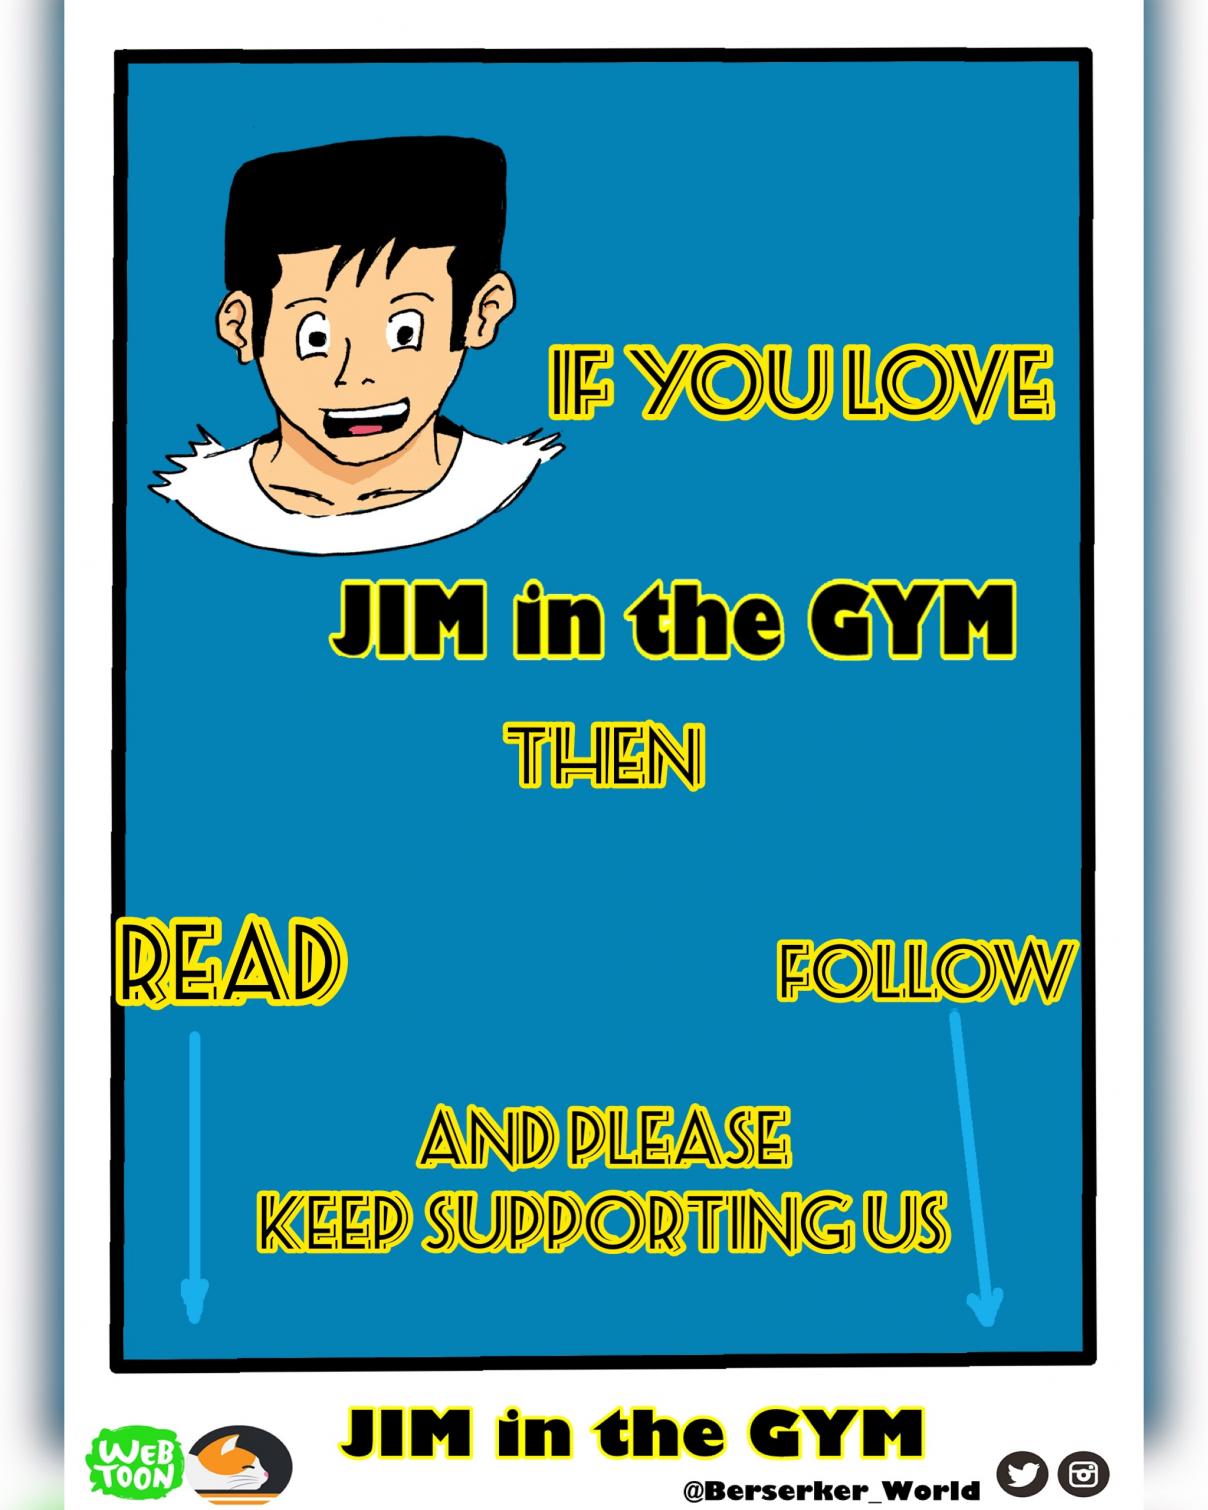 Jim in the Gym Vol. 1 Ch. 16.1 Friday Q&A's #2